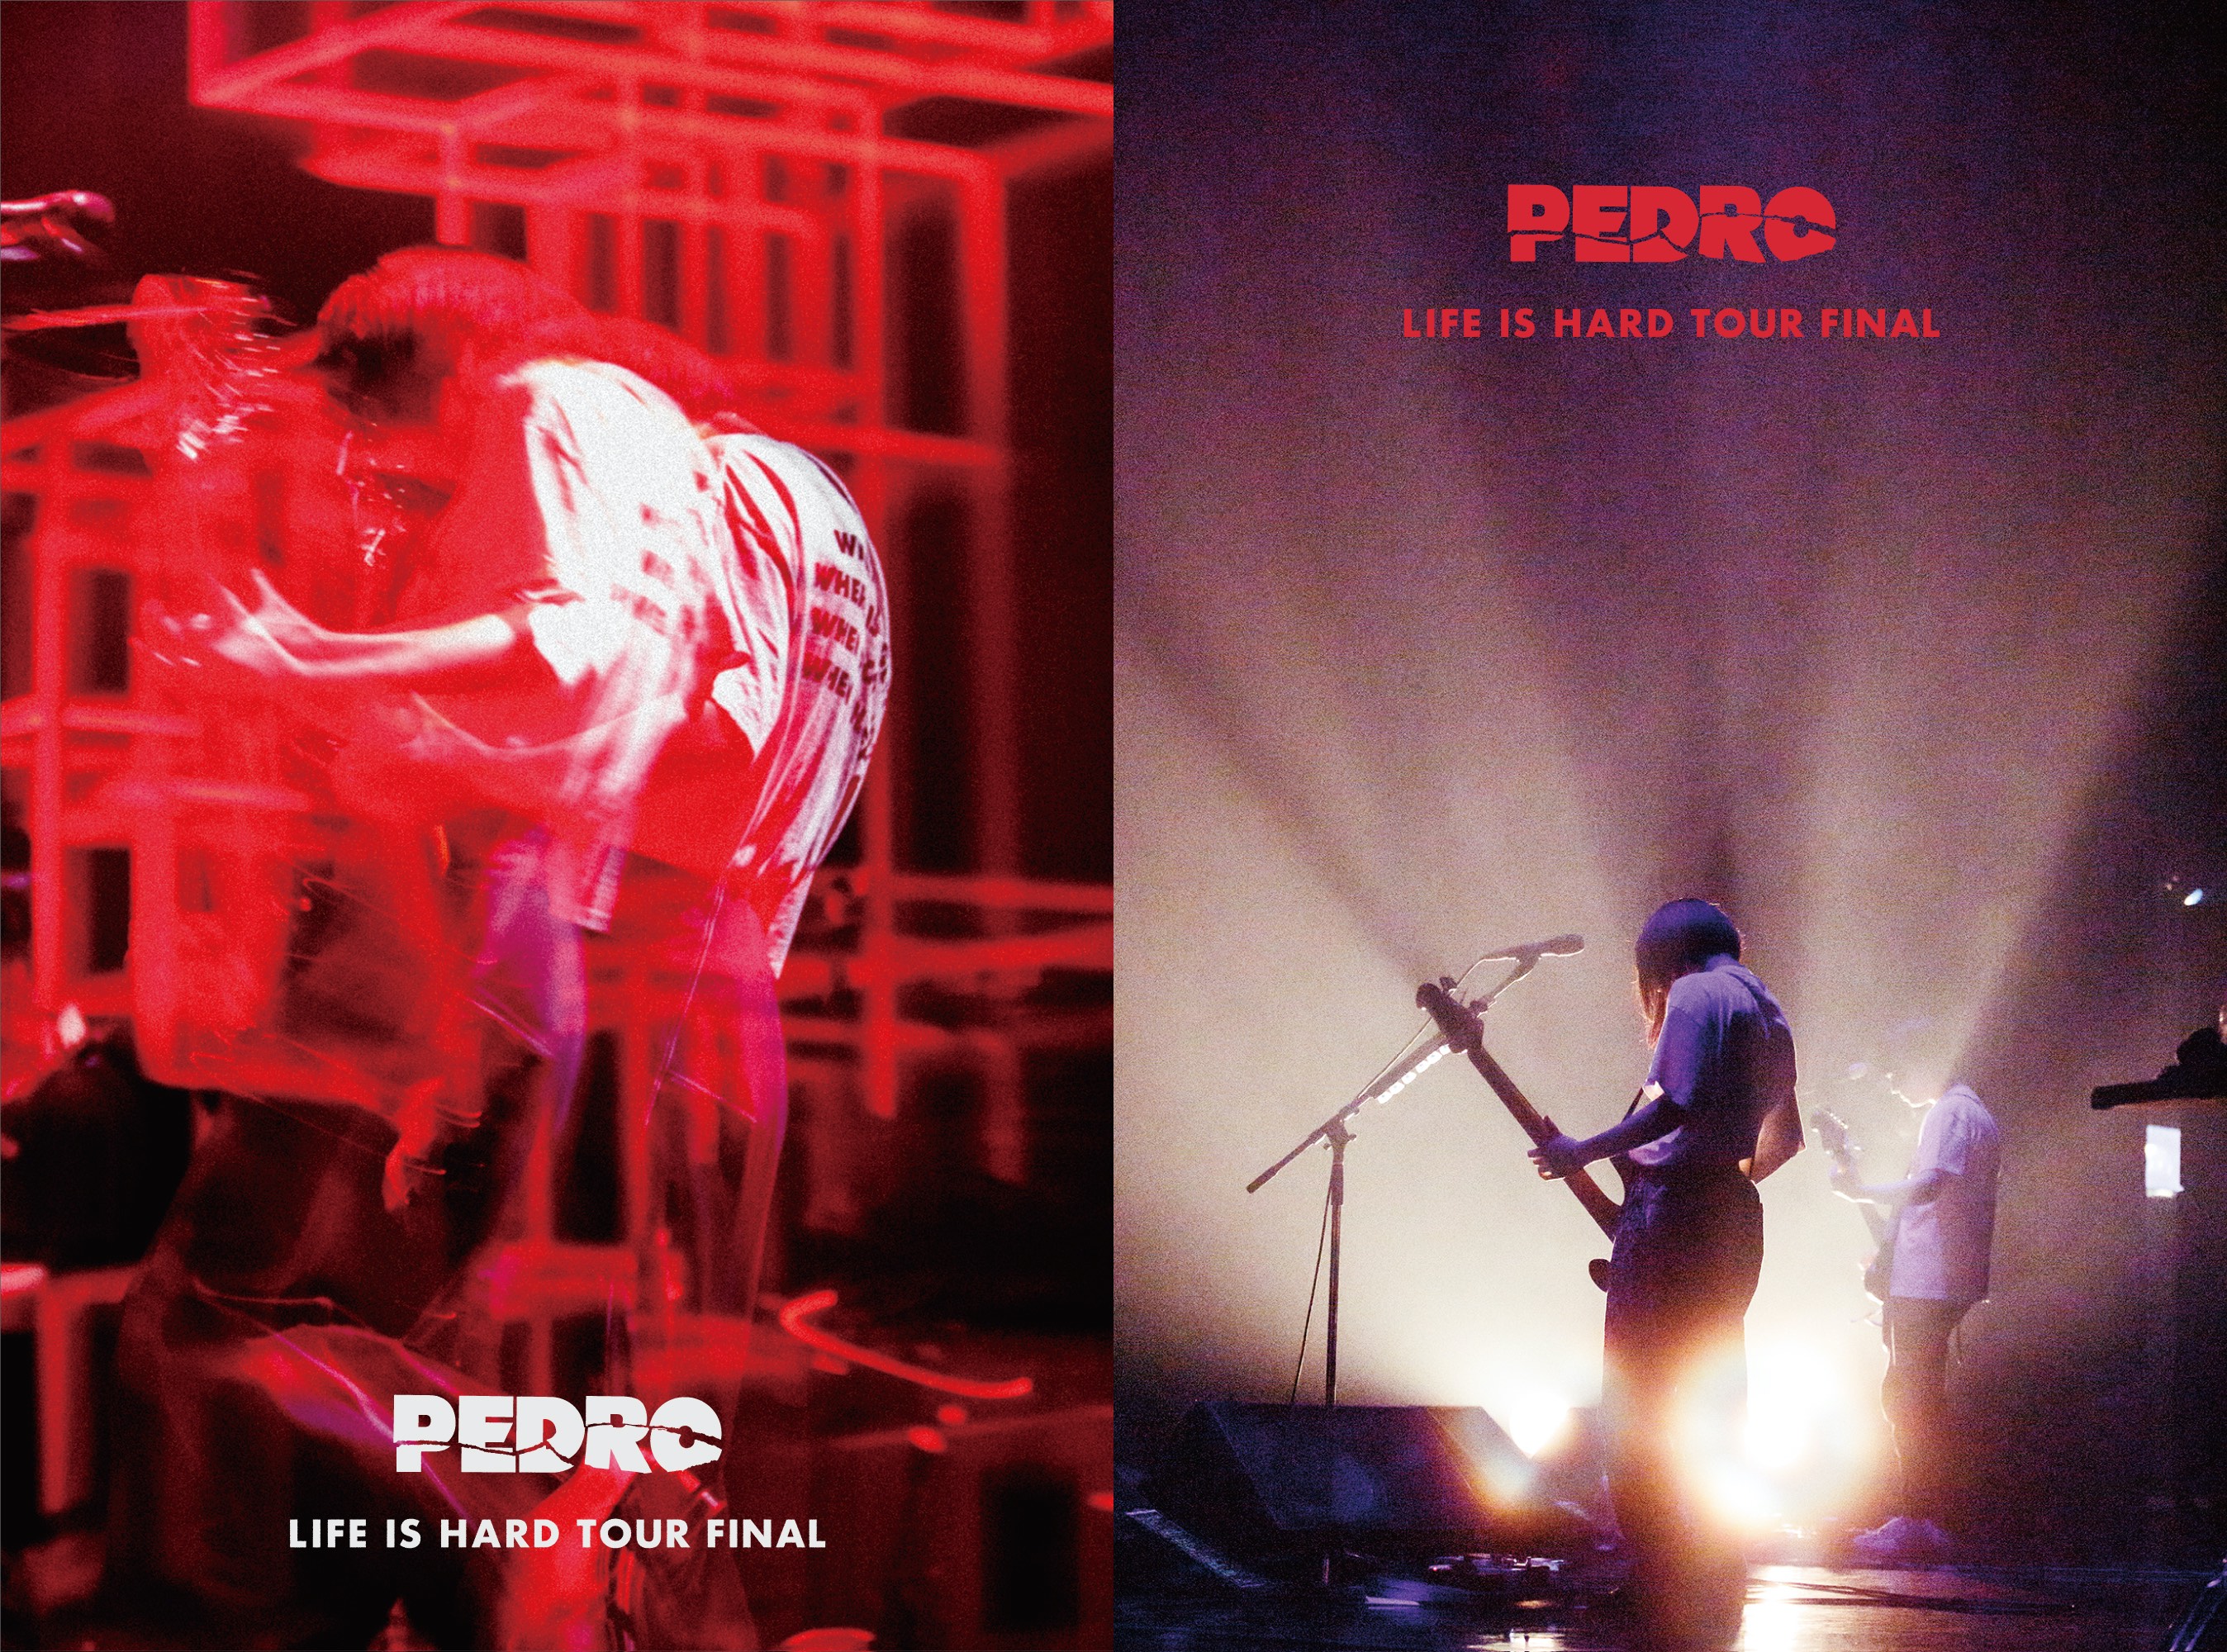 PEDRO LIFE IS HARD TOUR FINAL〈初回生産限定盤〉東京 - ミュージック